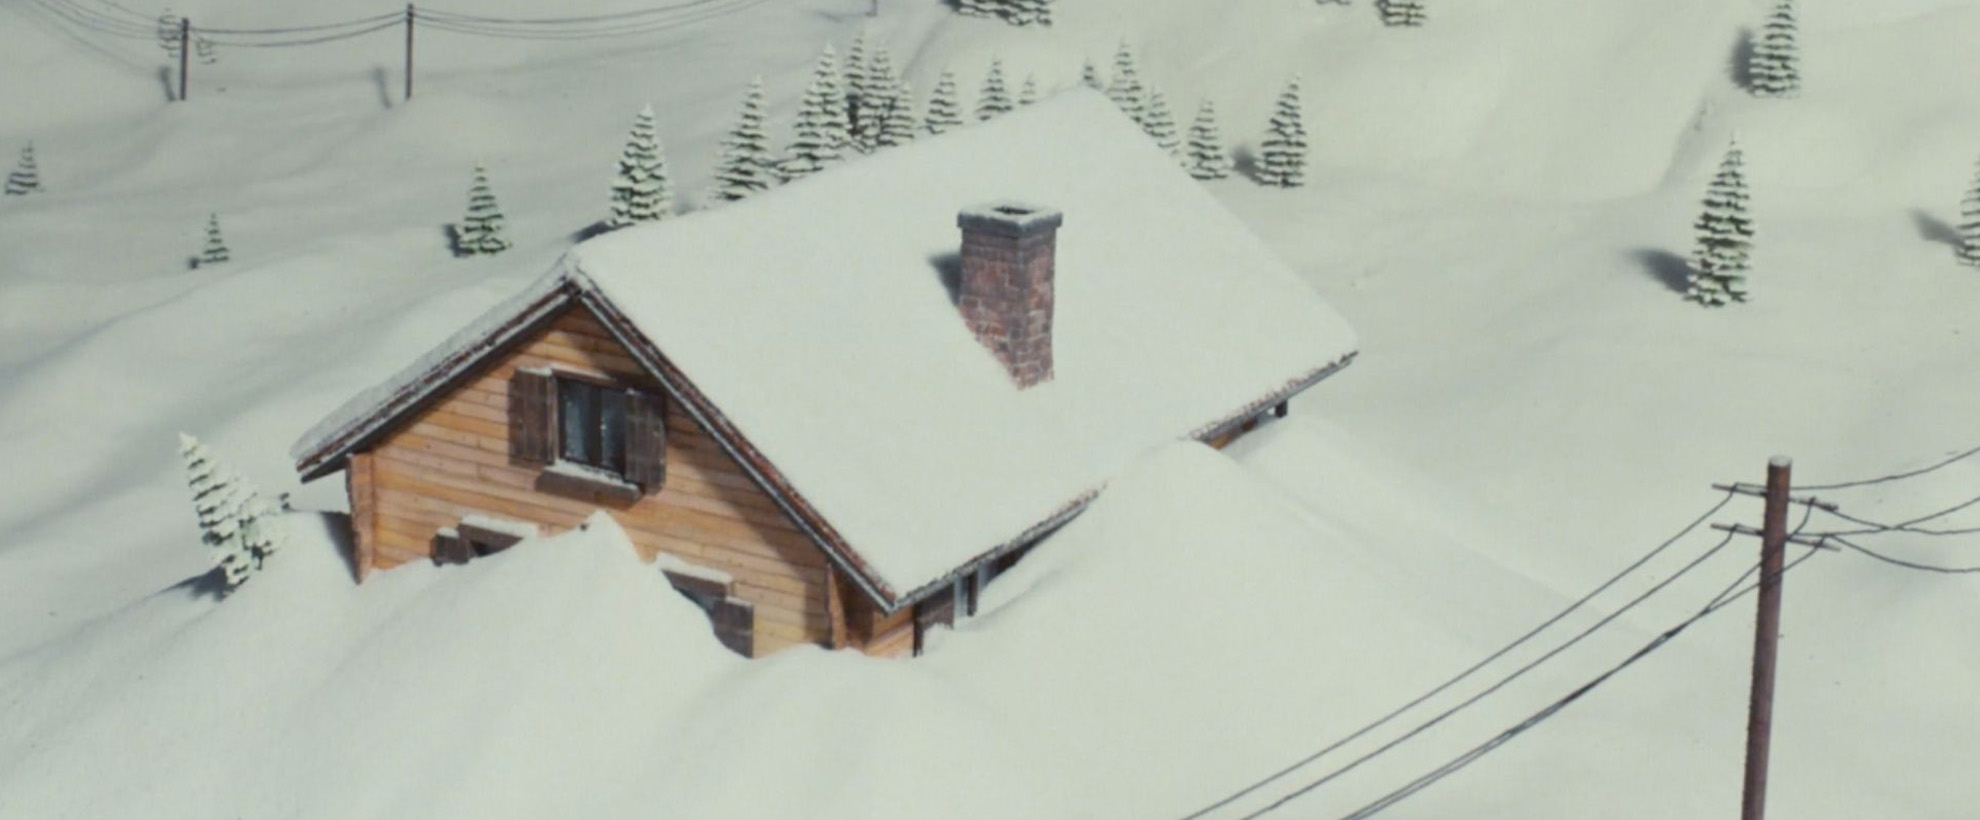 A cabin in the mountains is covered in snow from an avalanche.